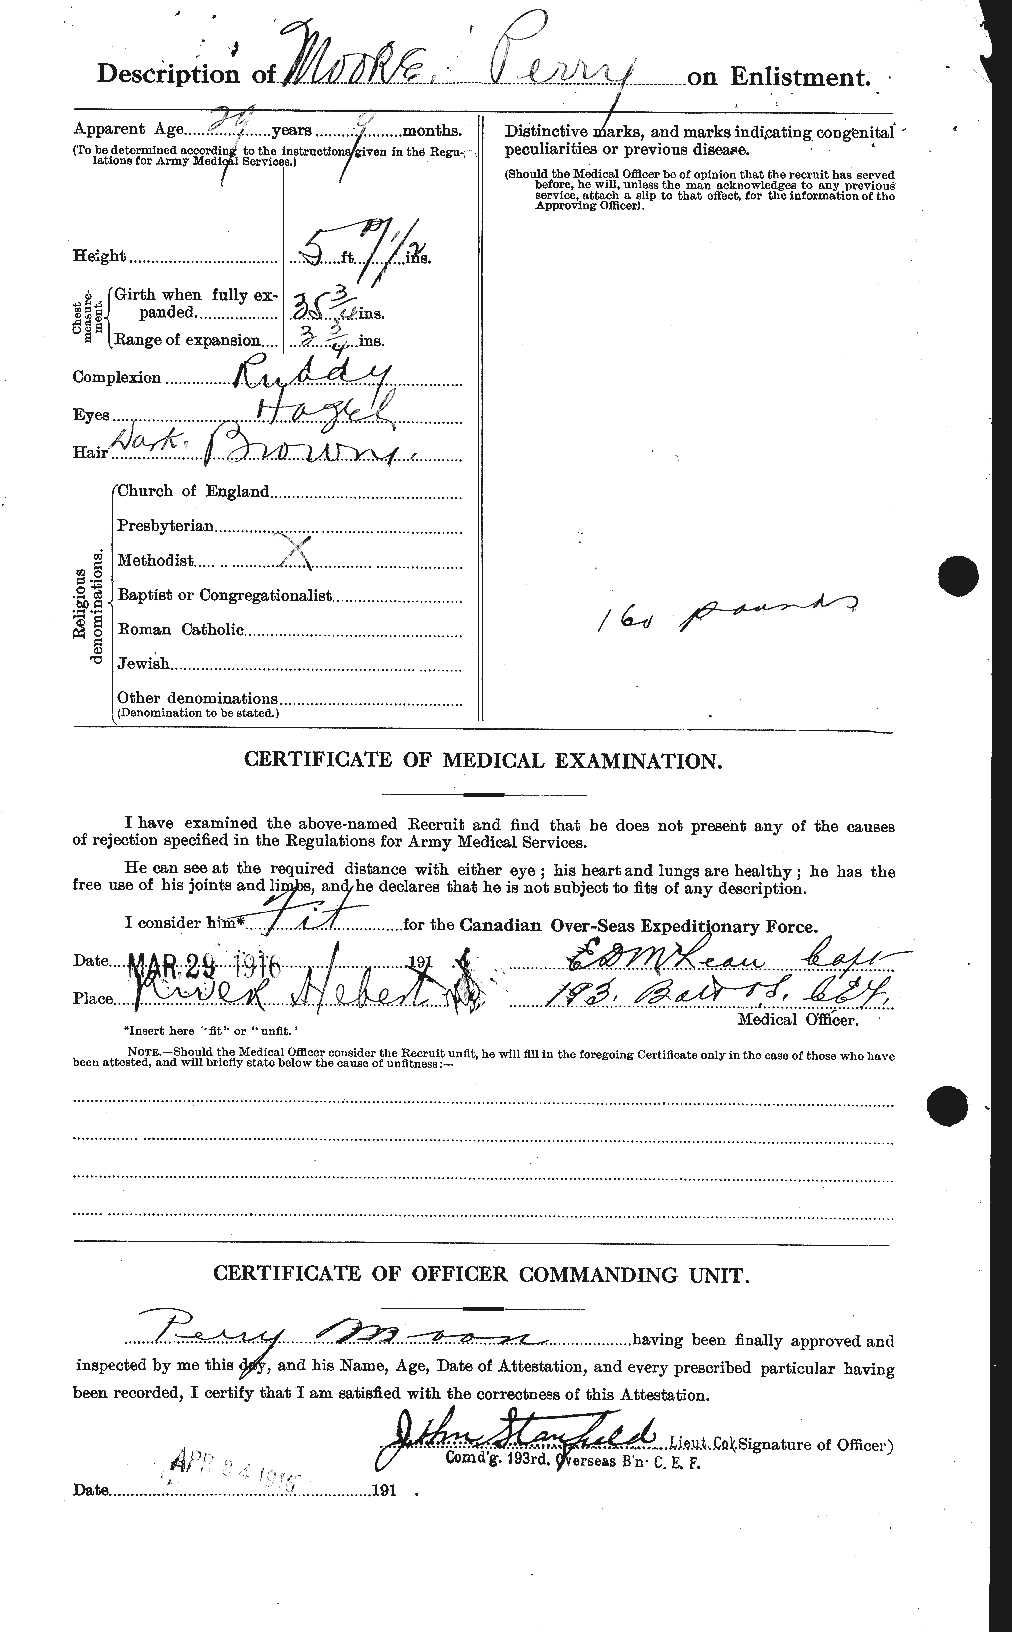 Personnel Records of the First World War - CEF 503492b